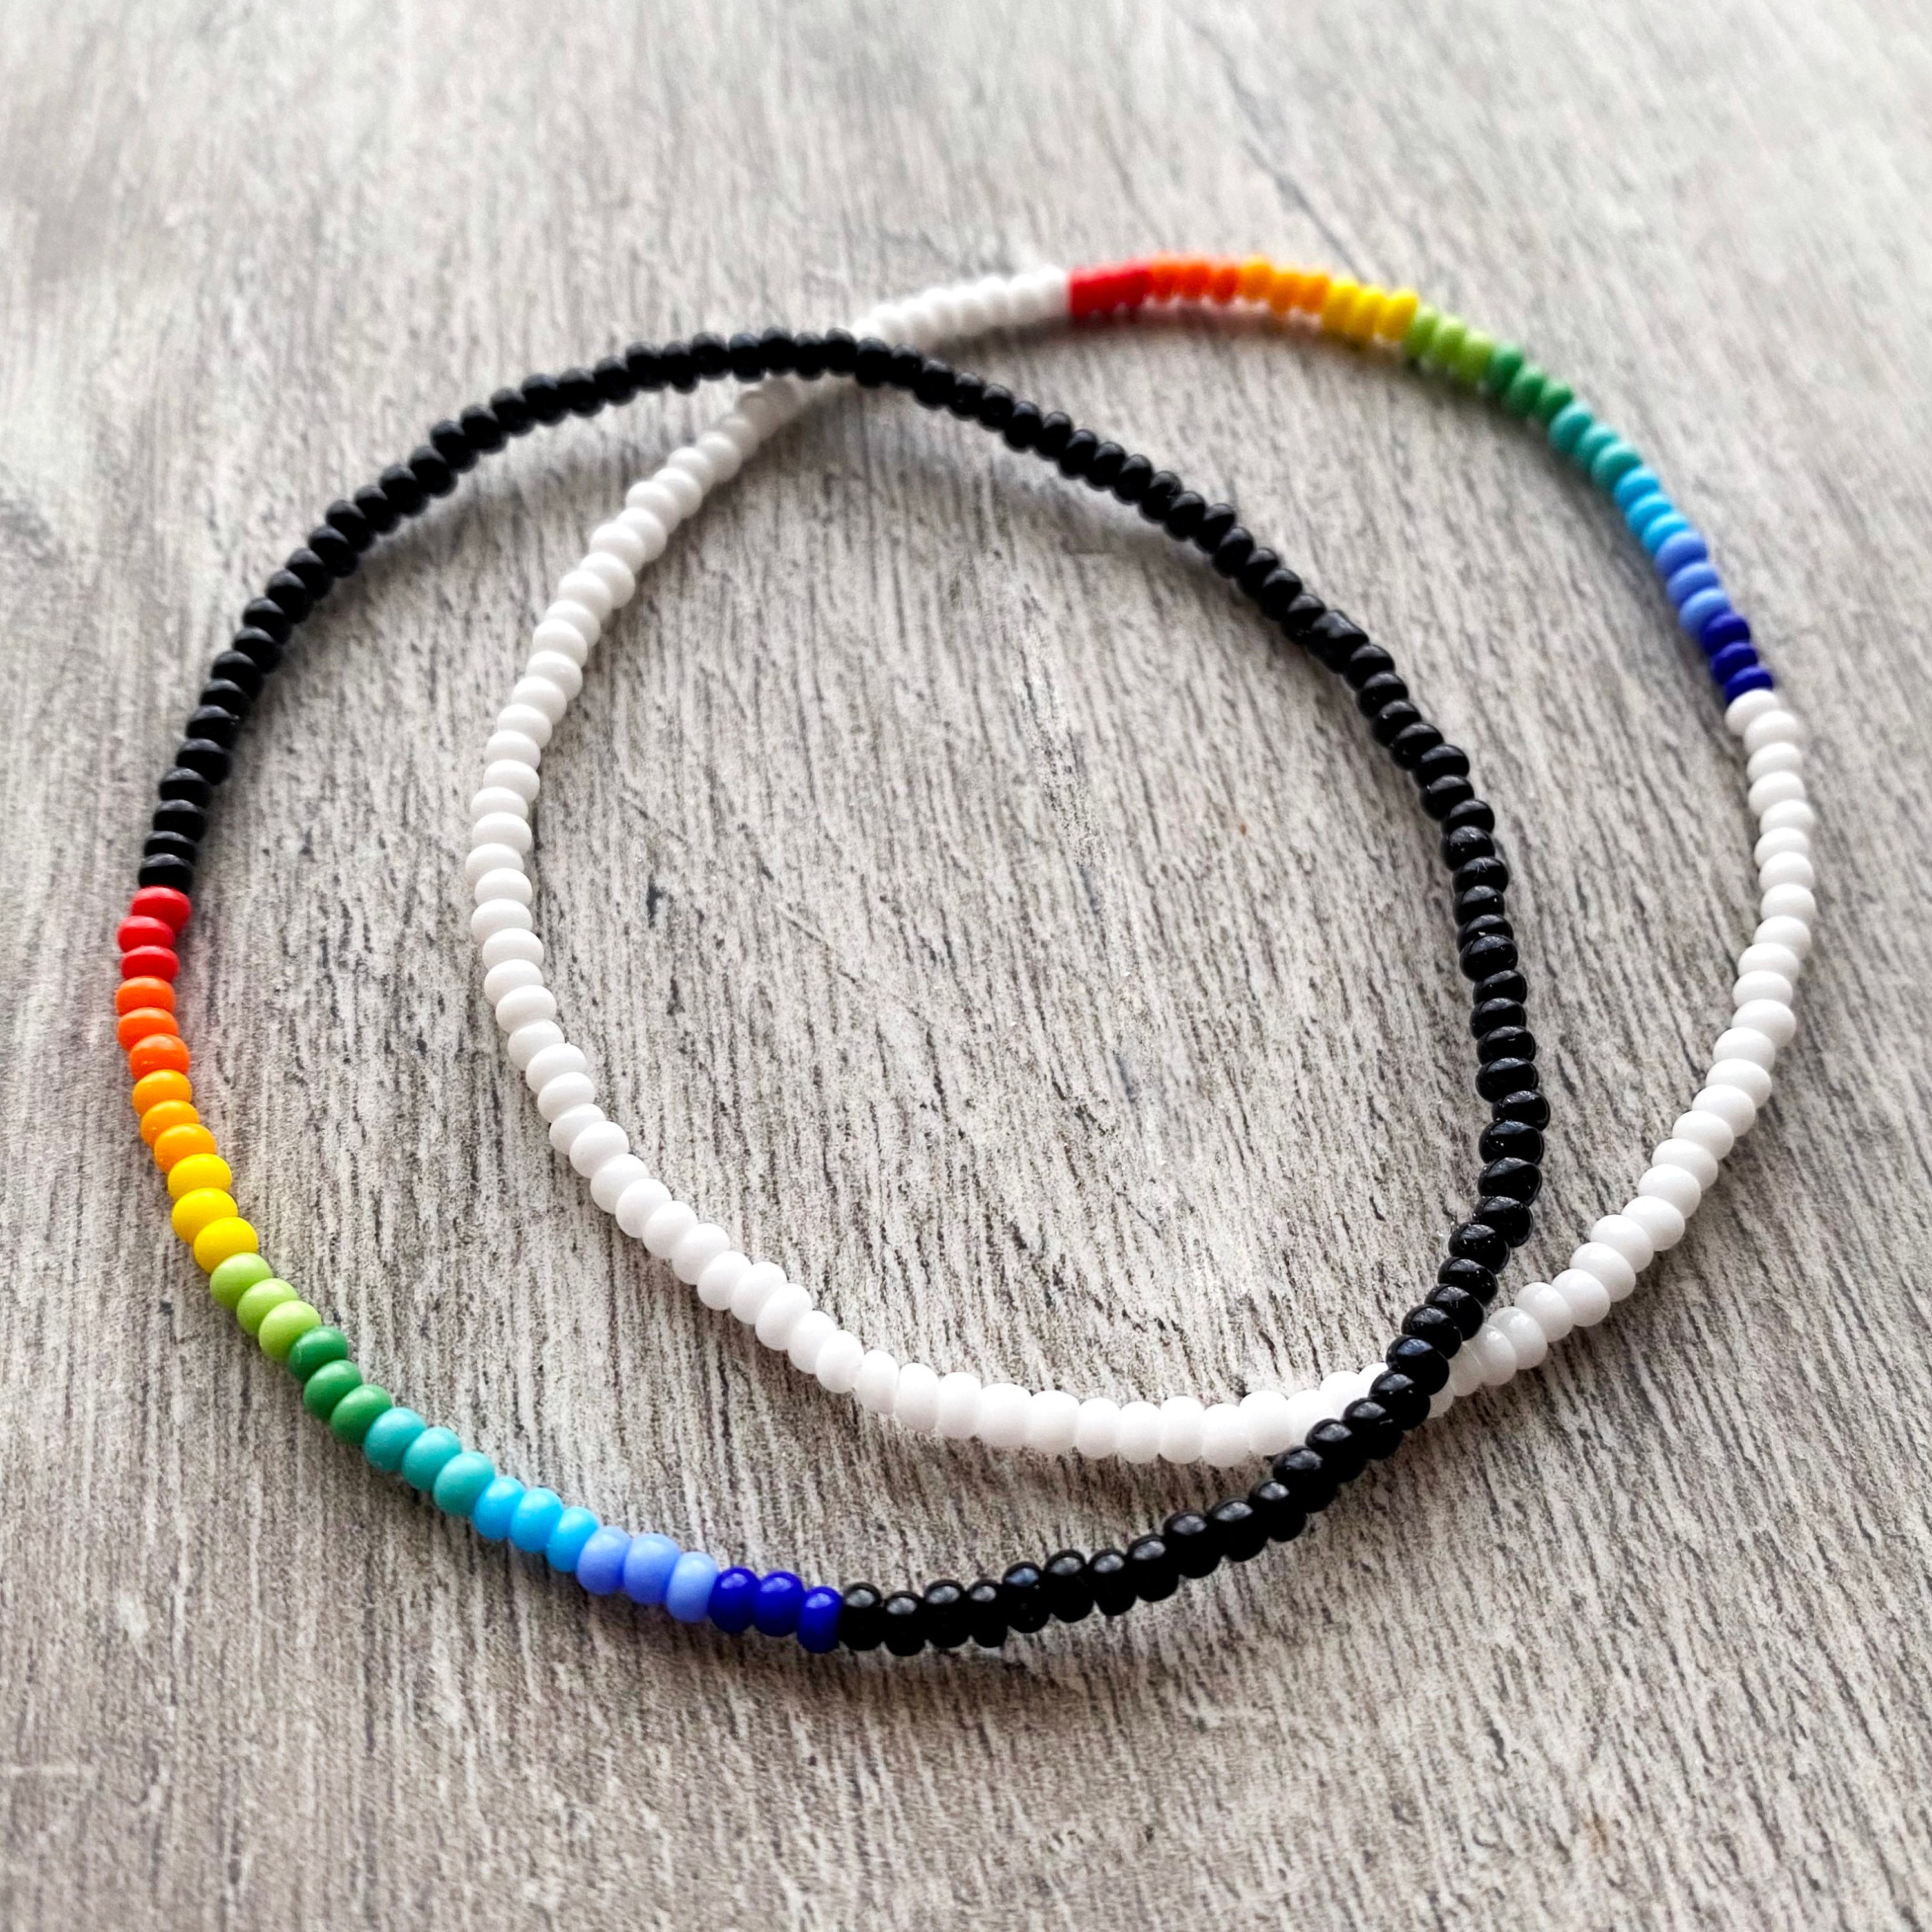 Disability Pride bracelet with flag colors : r/disability